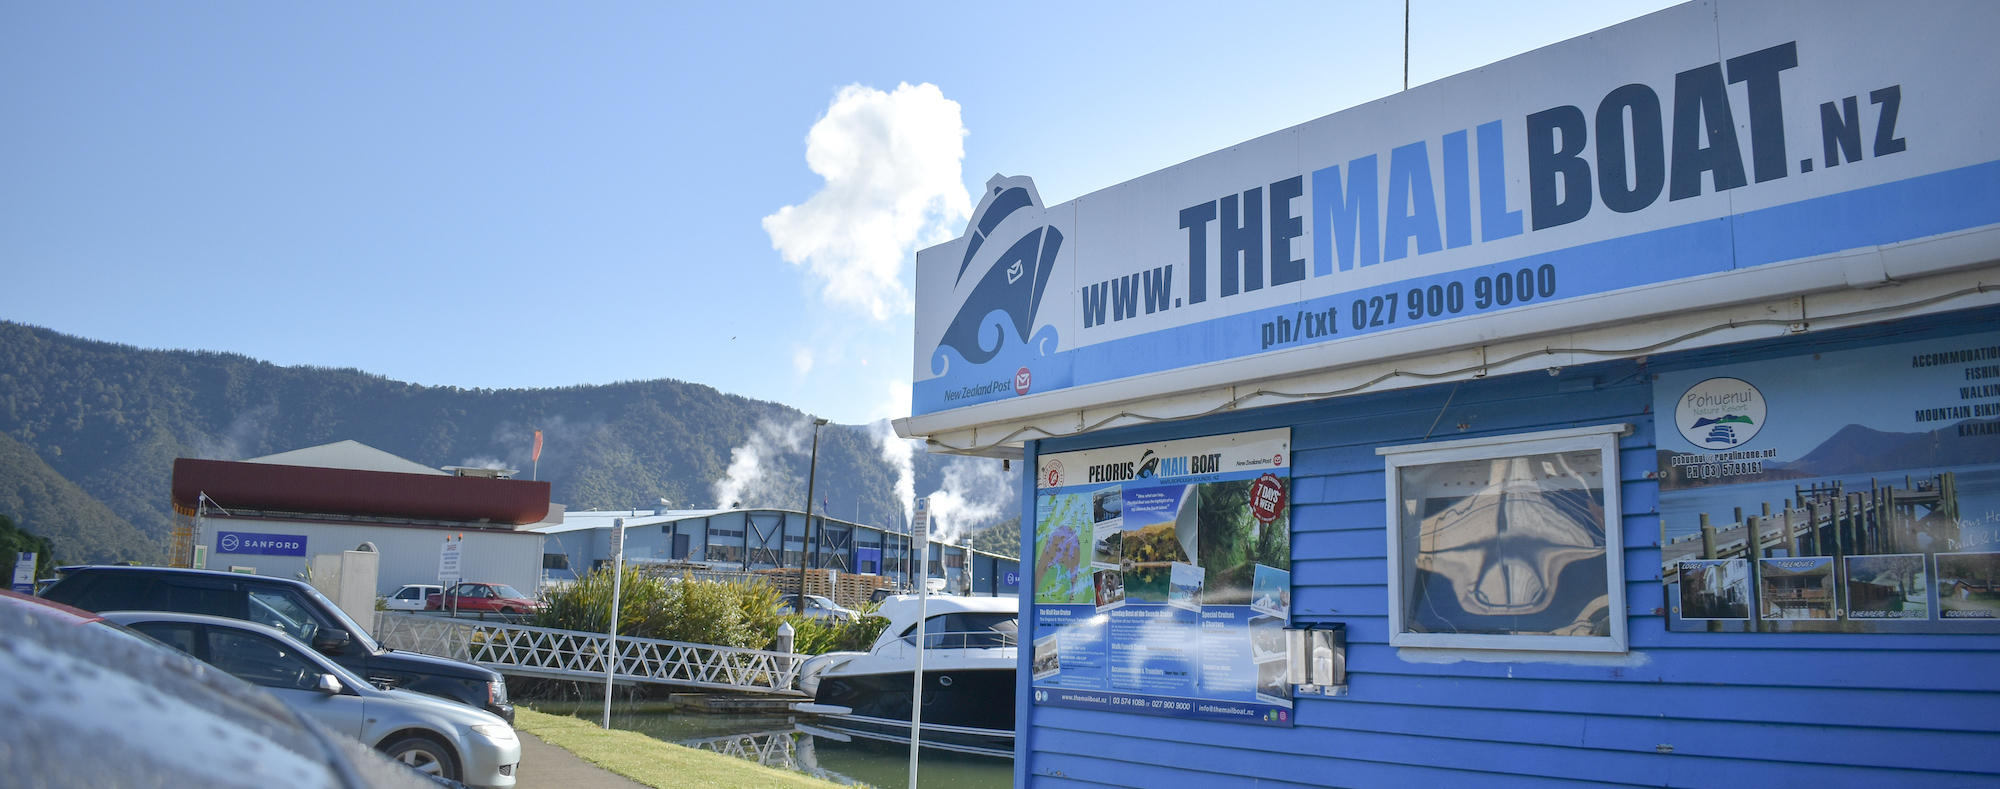 Find the Pelorus Mail Boat booking office on the Havelock Marina waterfront.